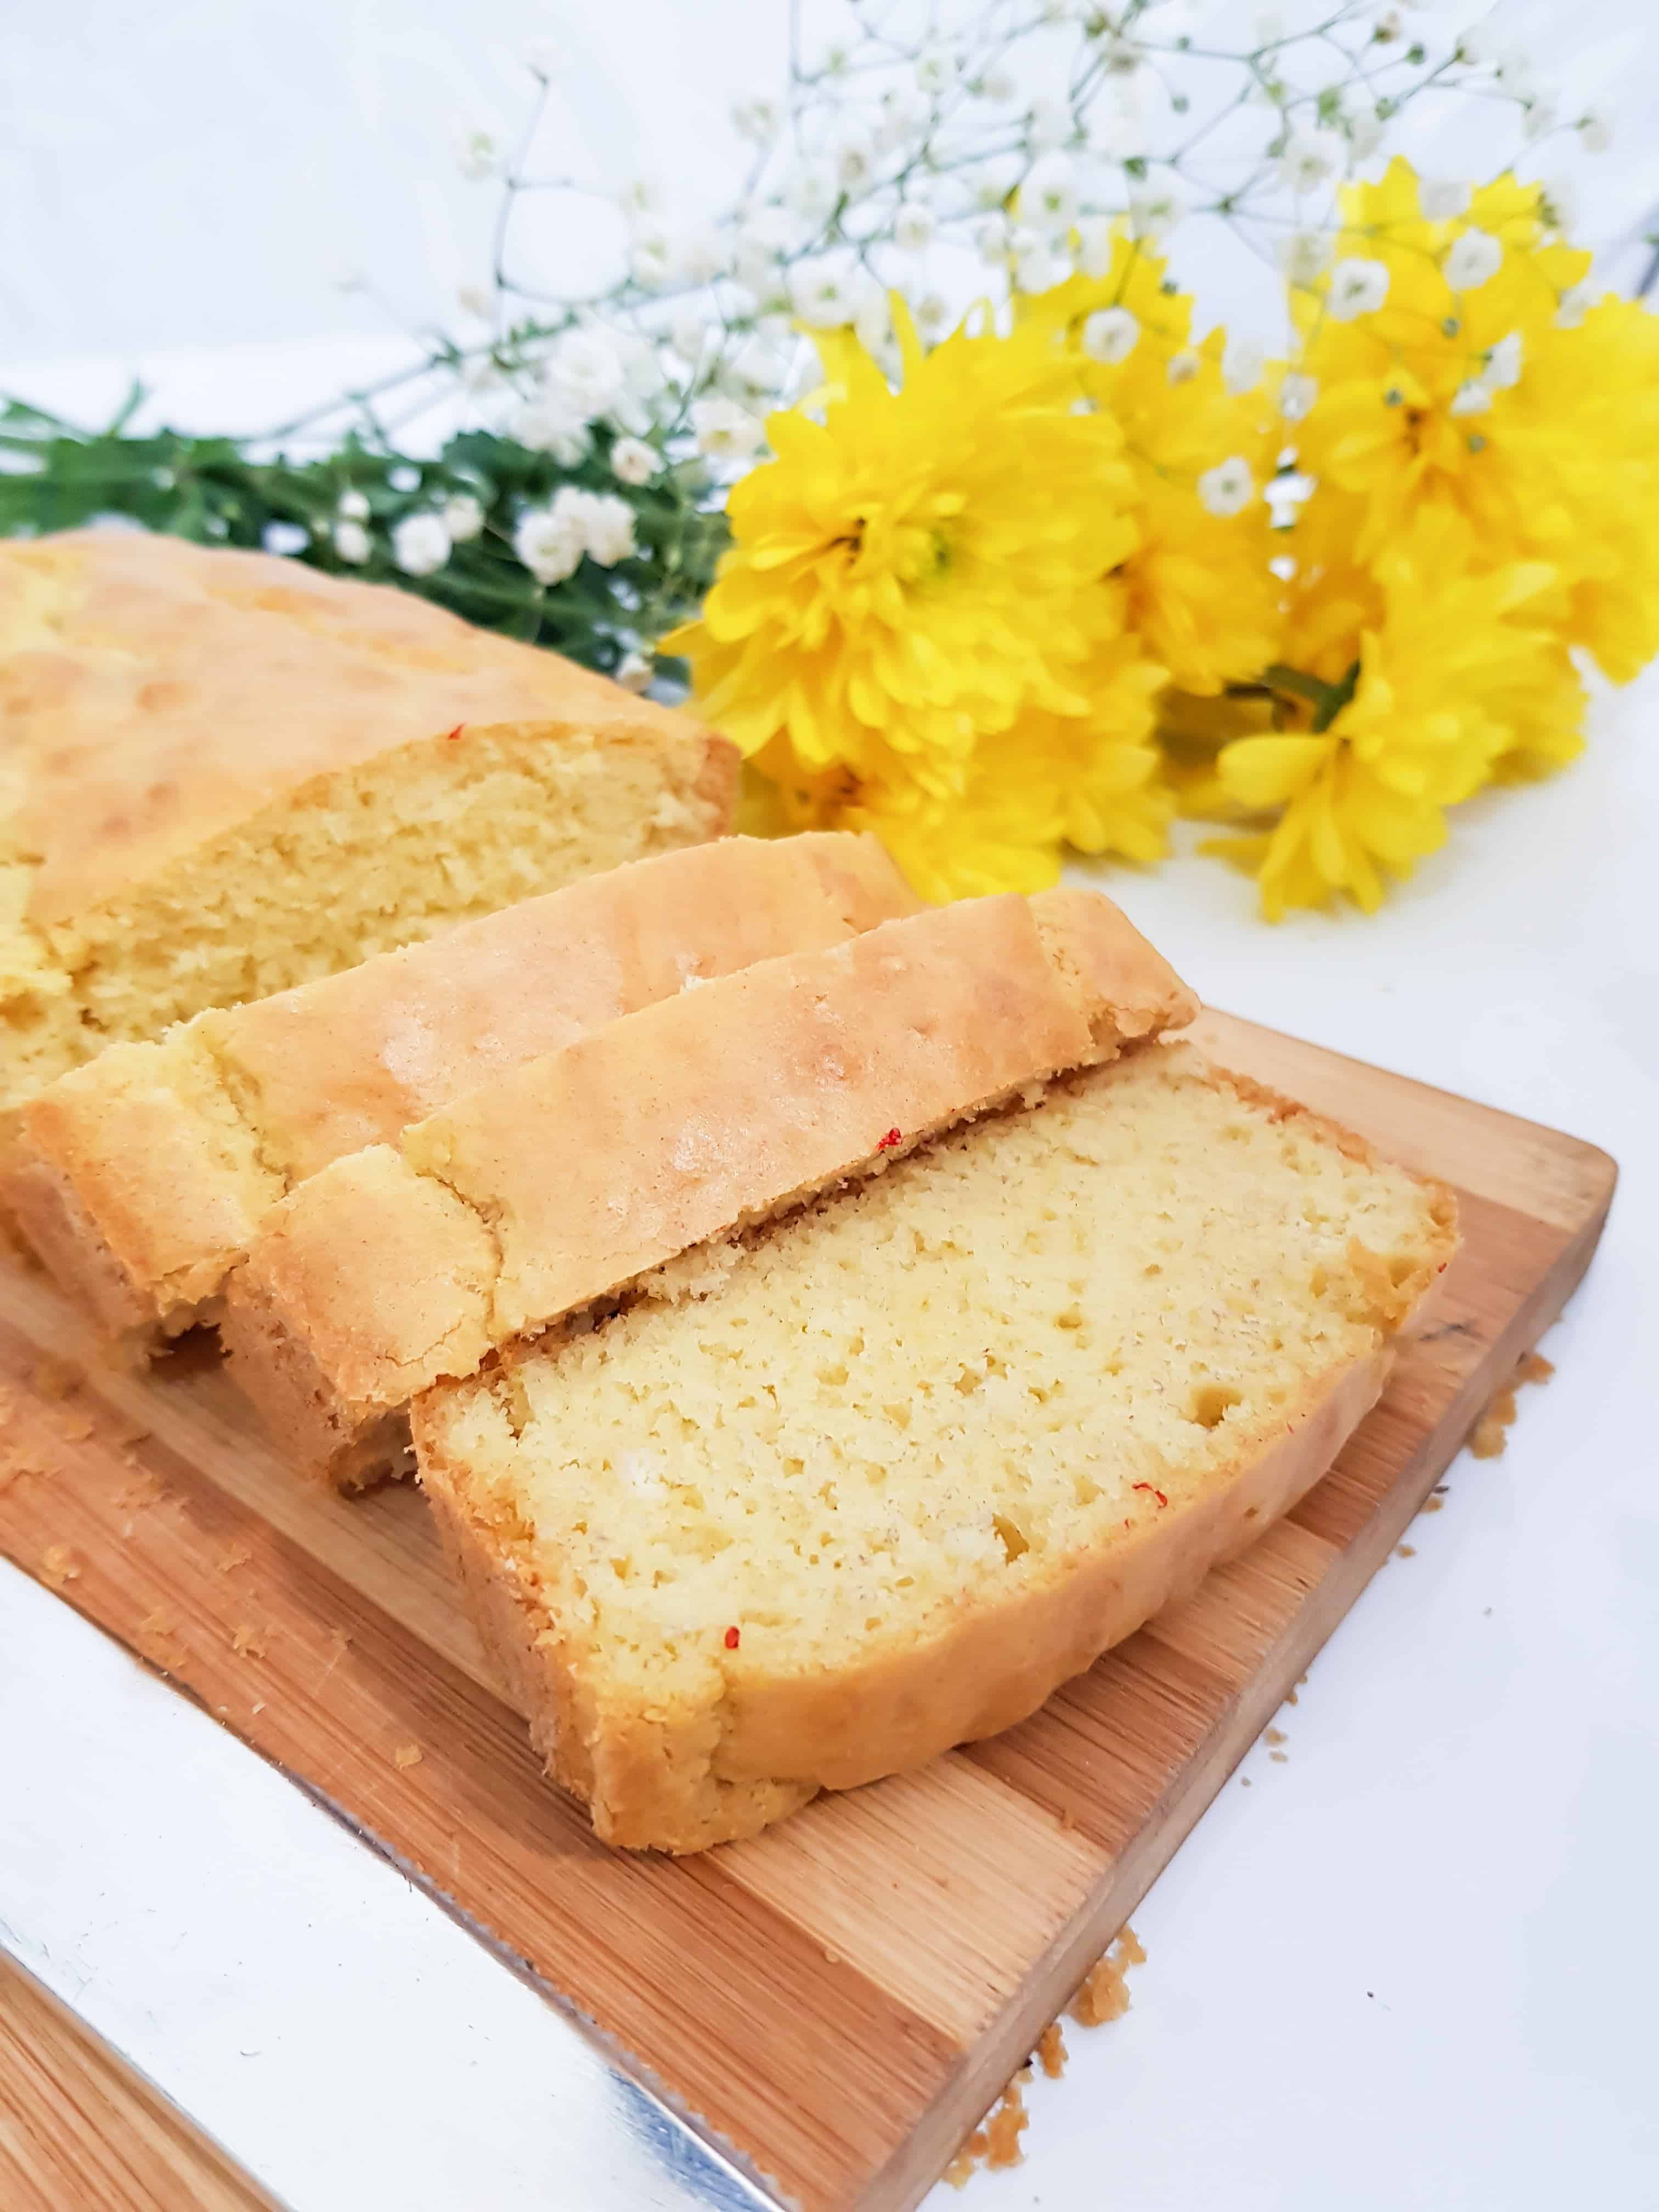 Keto bread made with Almond Flour